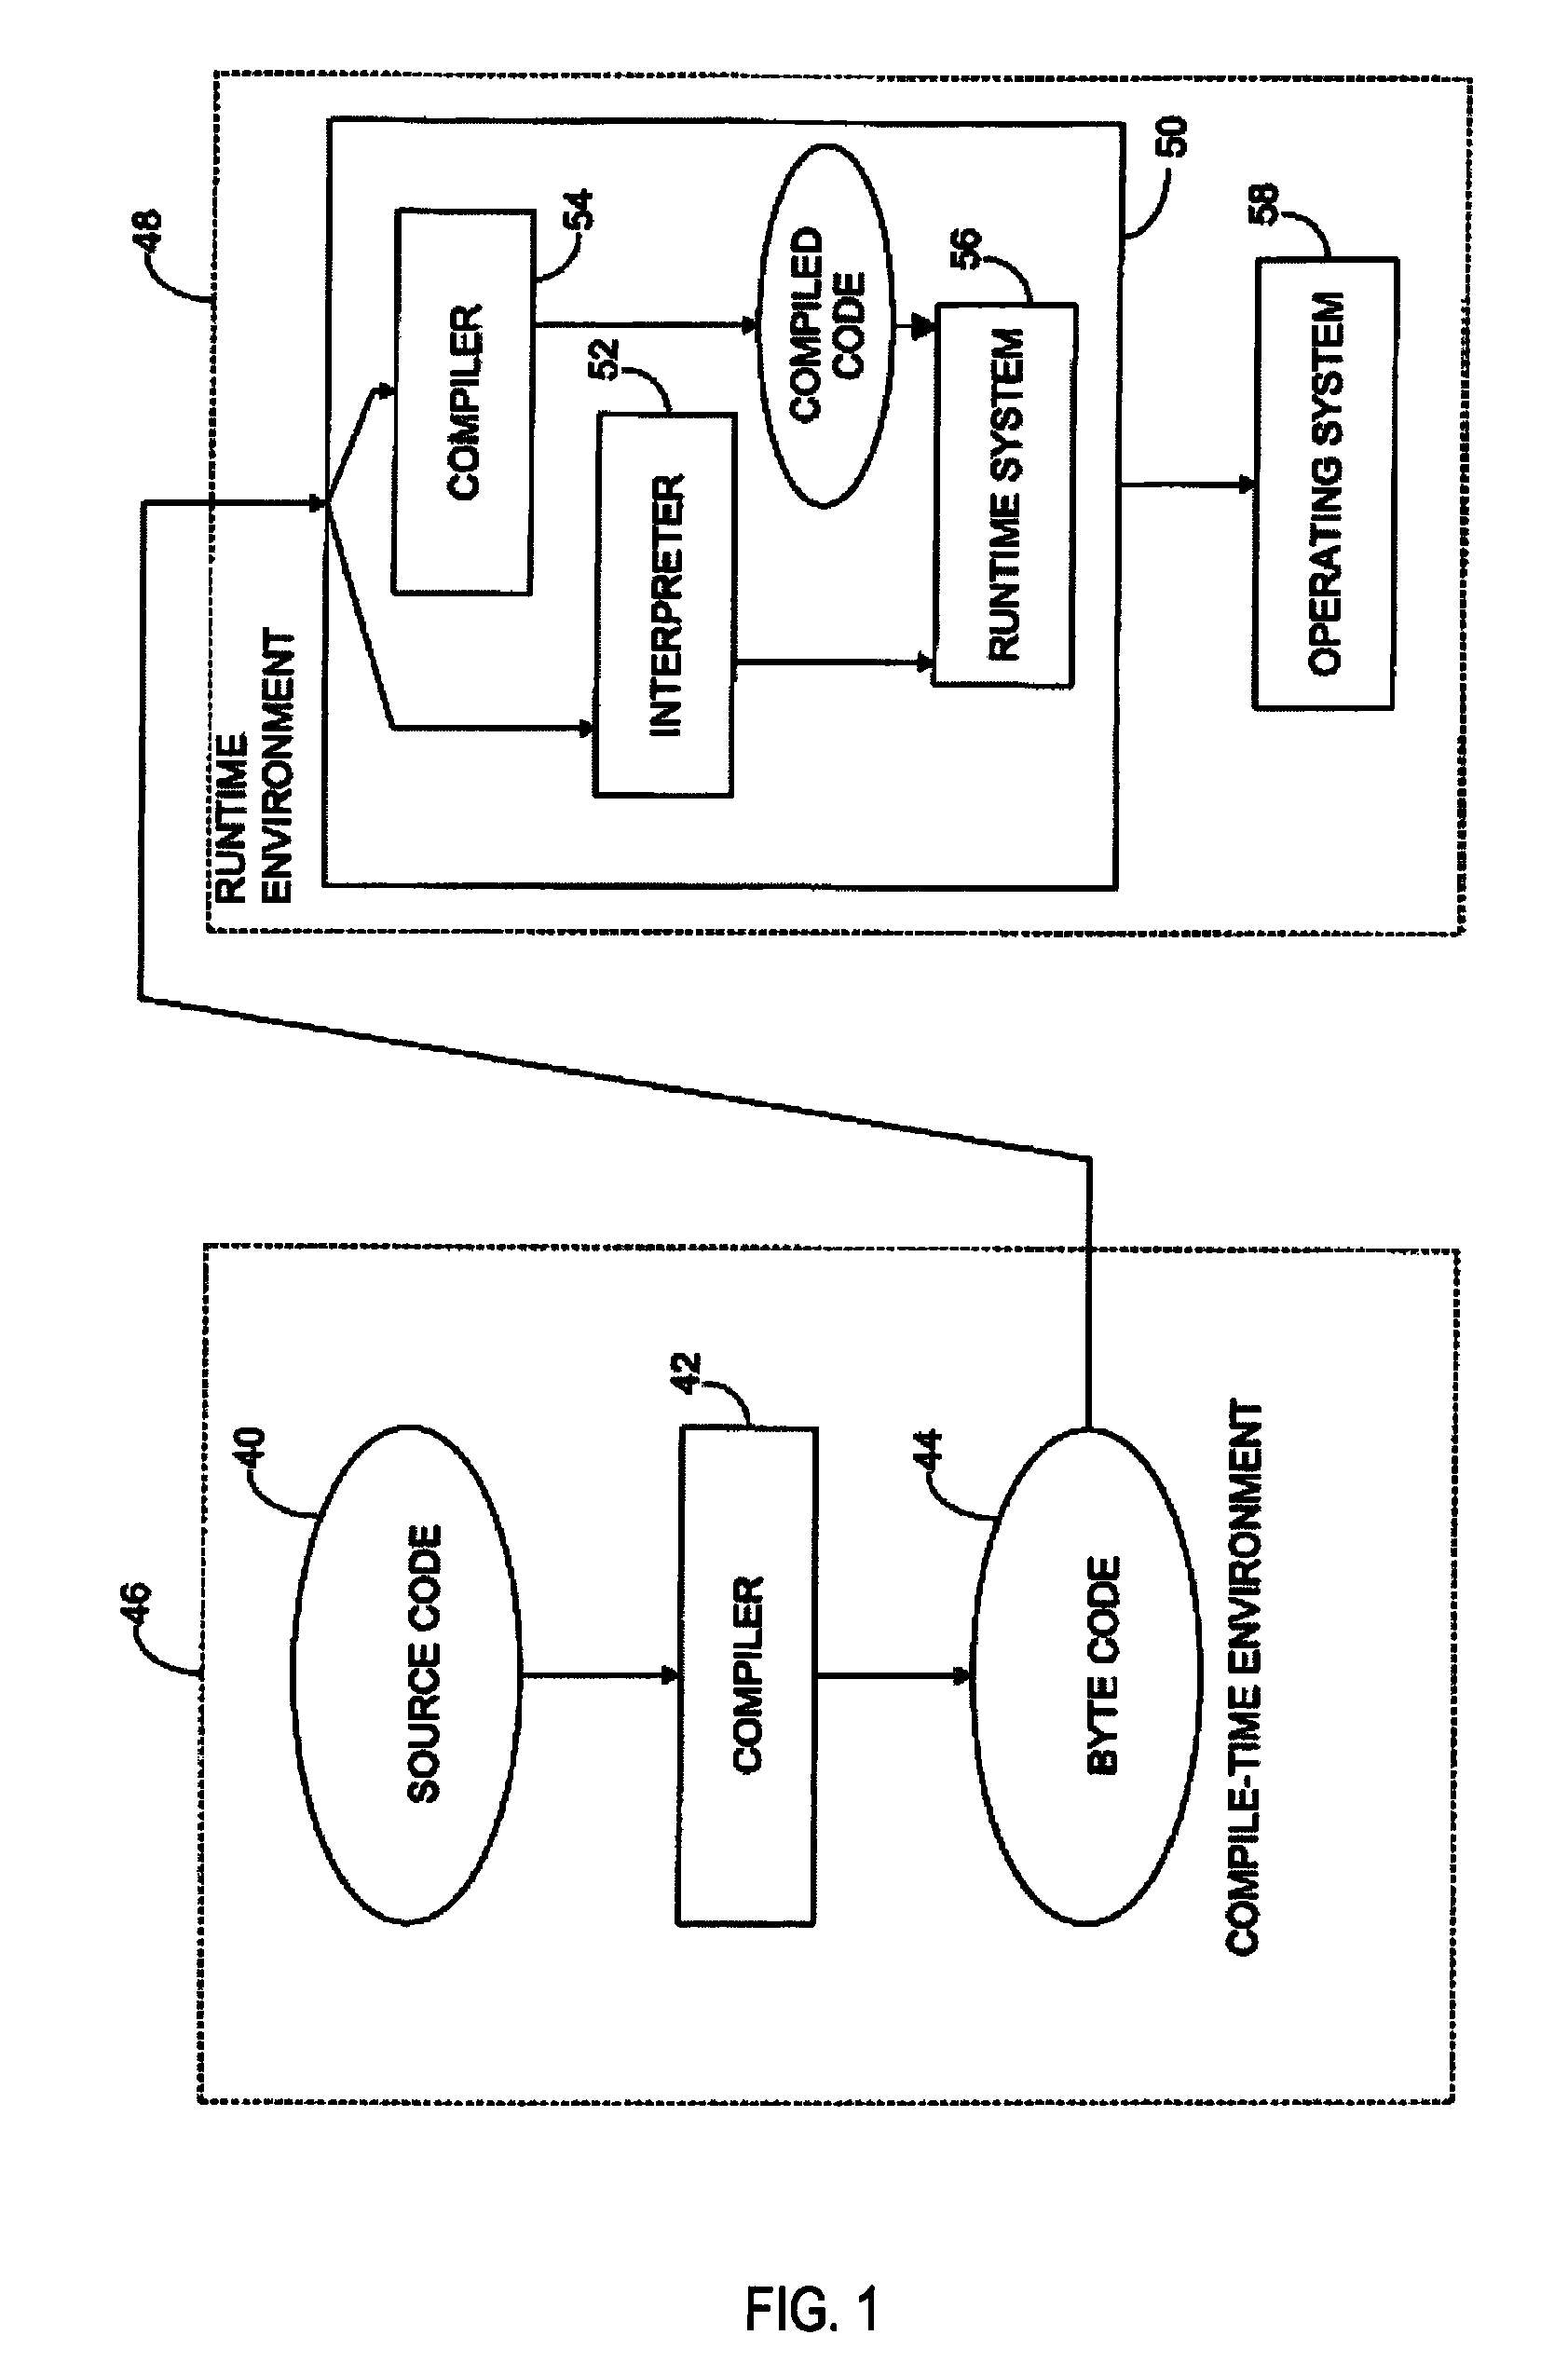 Barrier synchronization method and apparatus for work-stealing threads